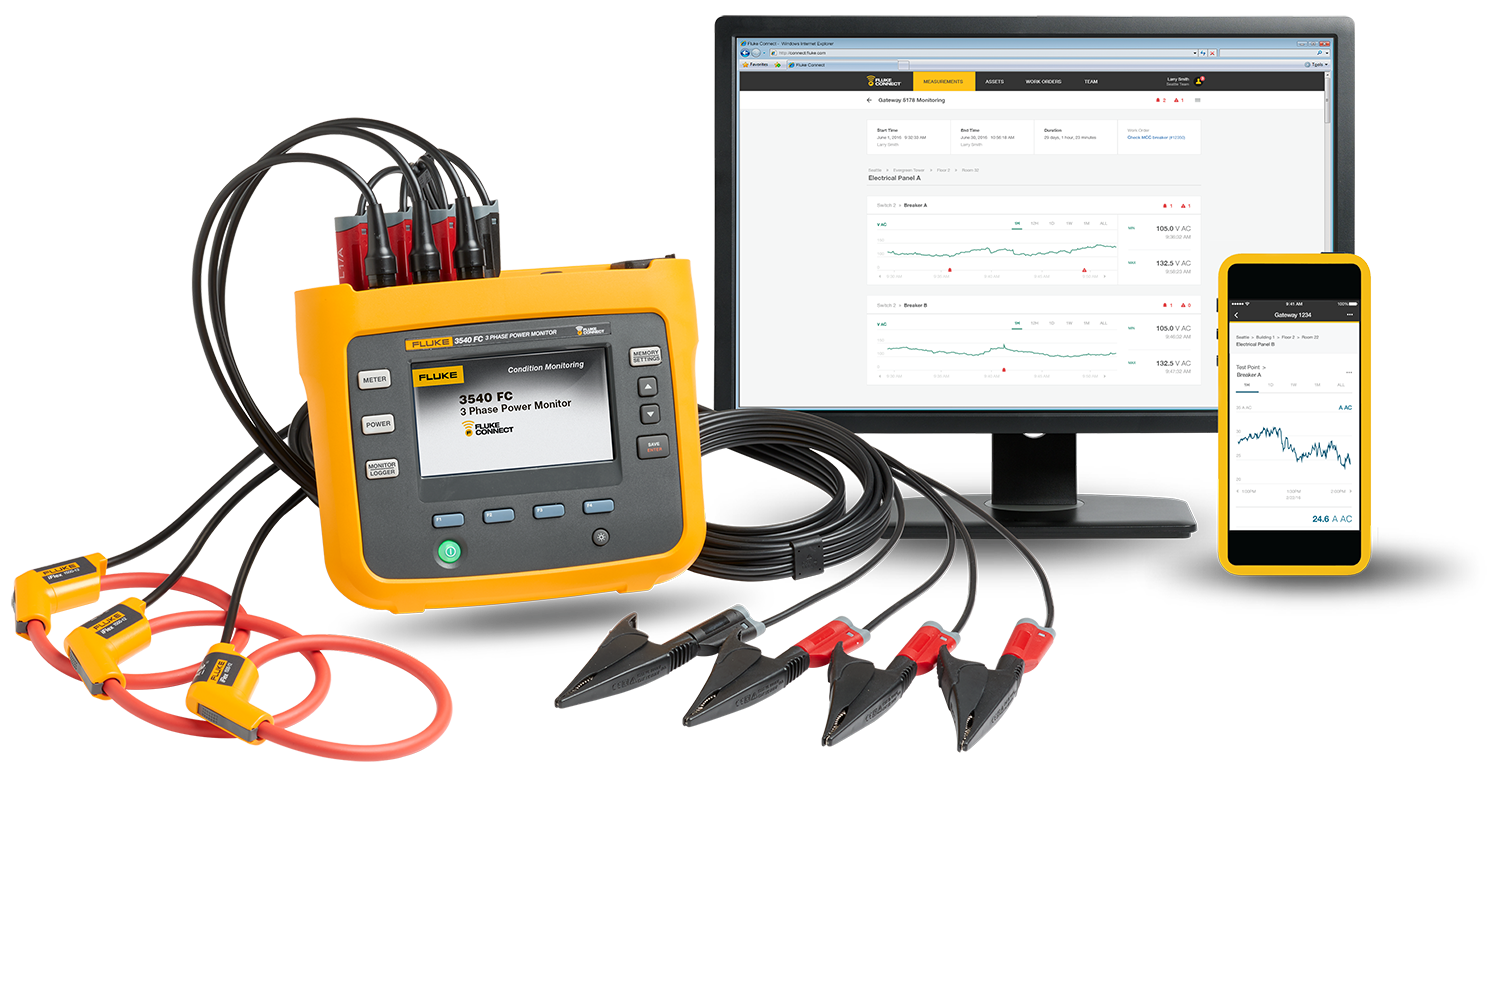 A Fluke 3540 FC Three-Phase Power Monitor and Fluke Connect software on a desktop and smart device.